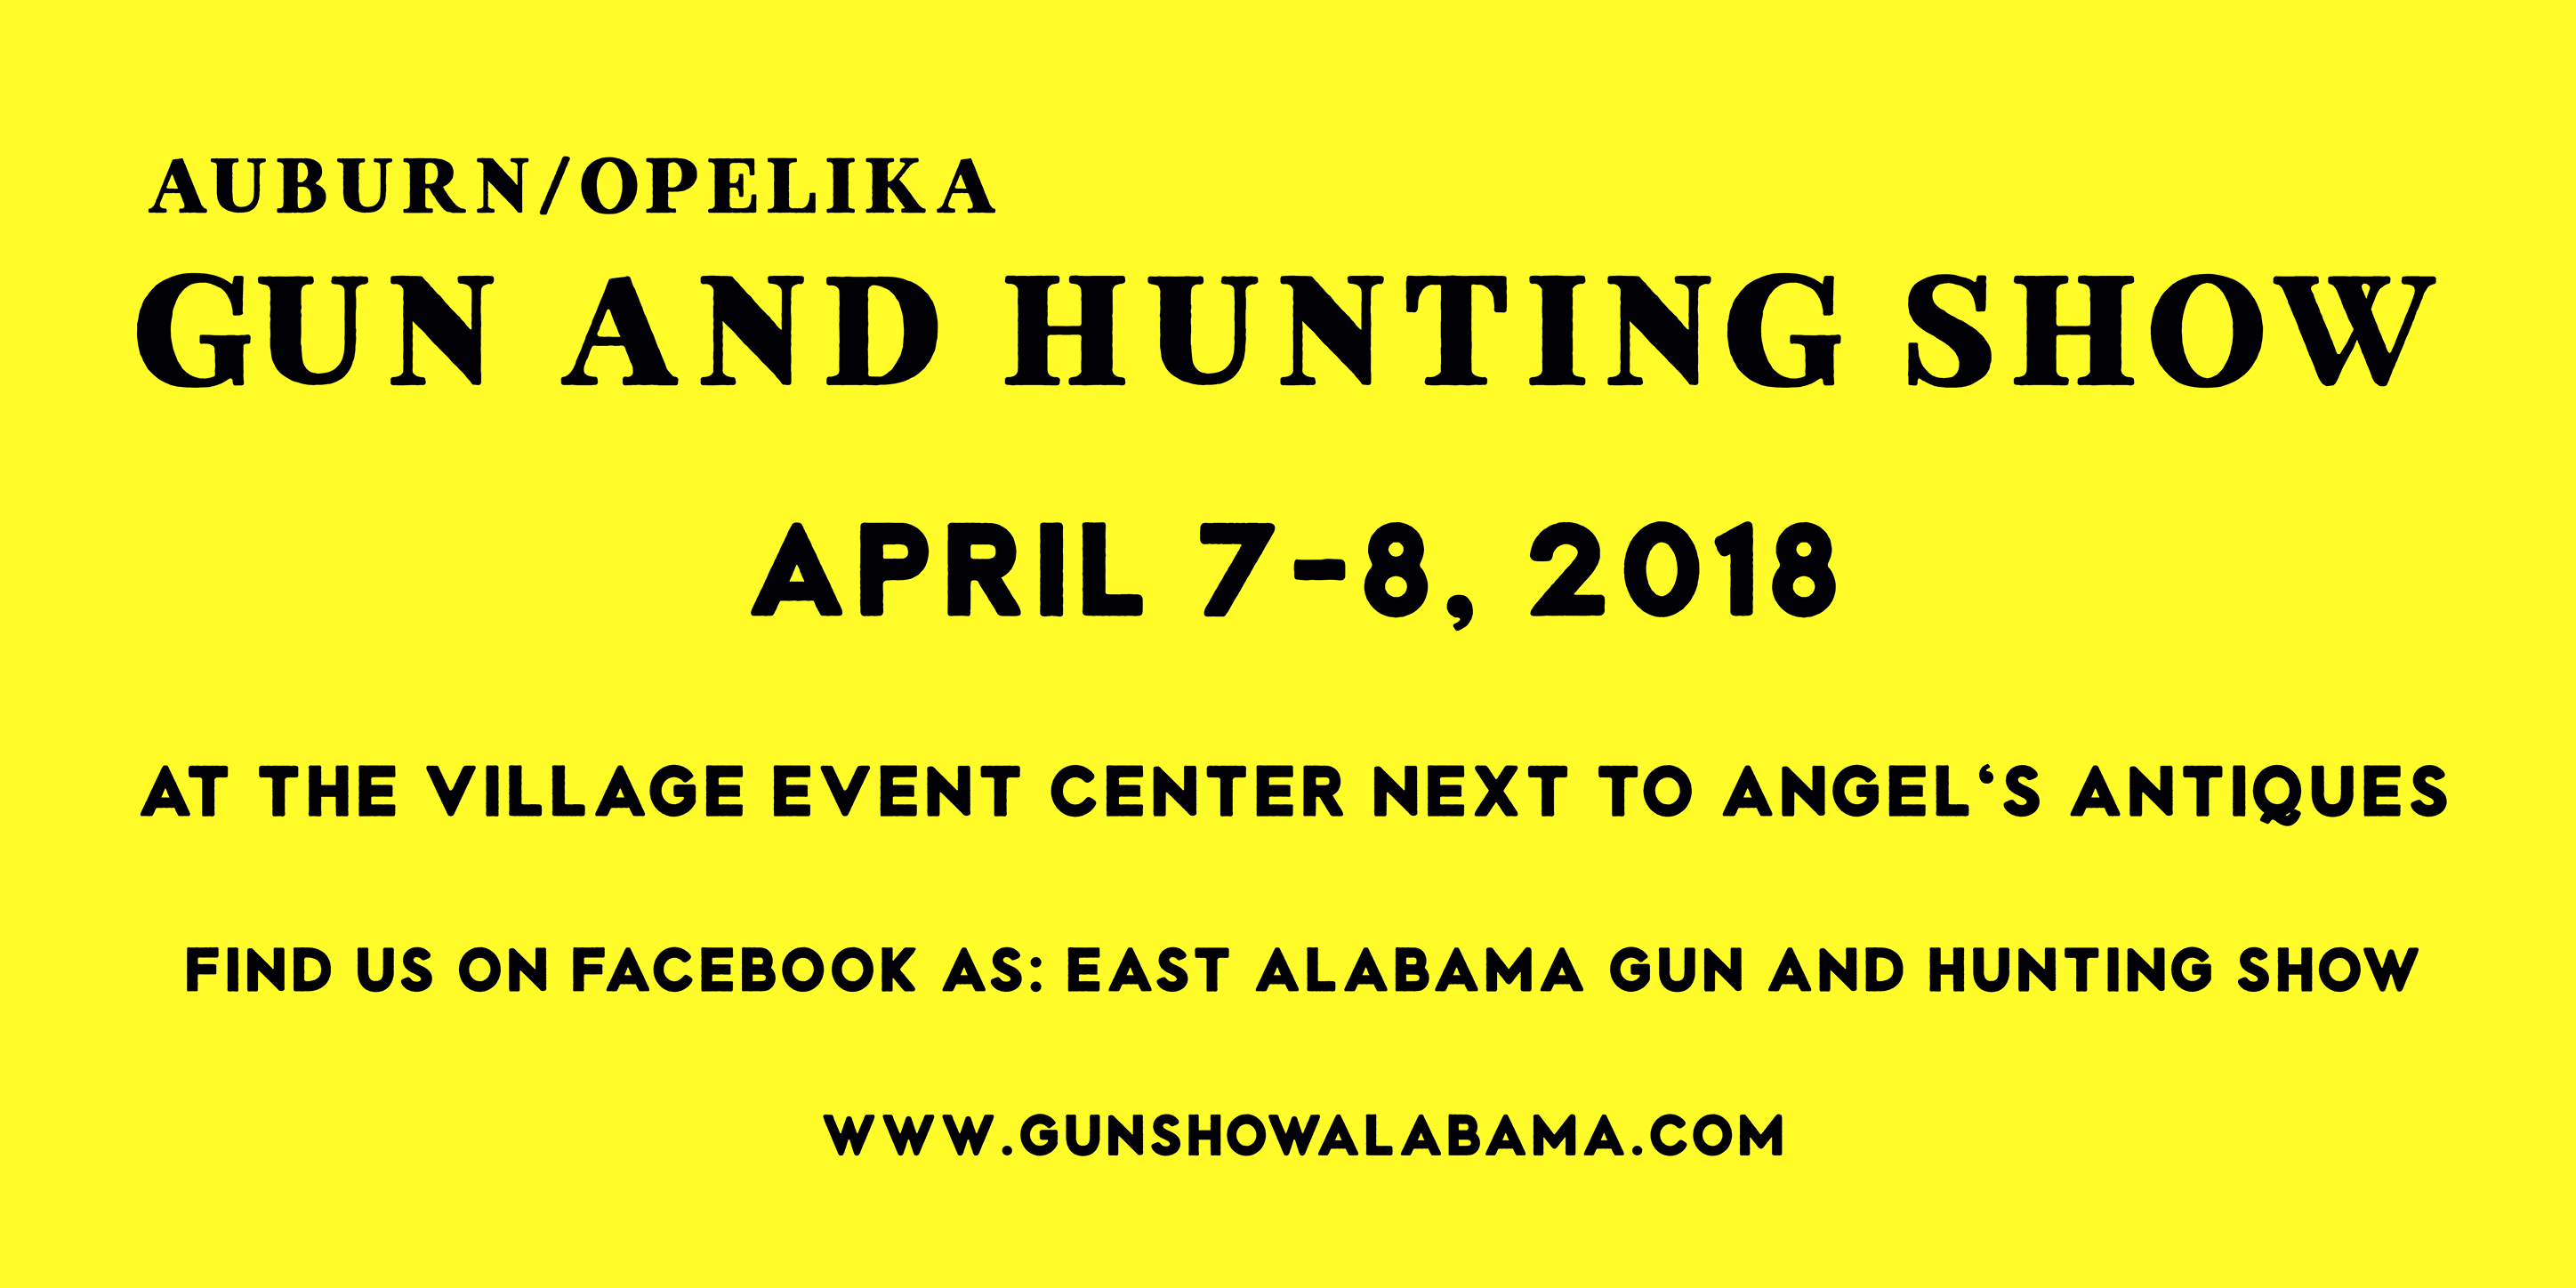 Auburn-Opelika Gun and Hunting Show to be held April 7-8